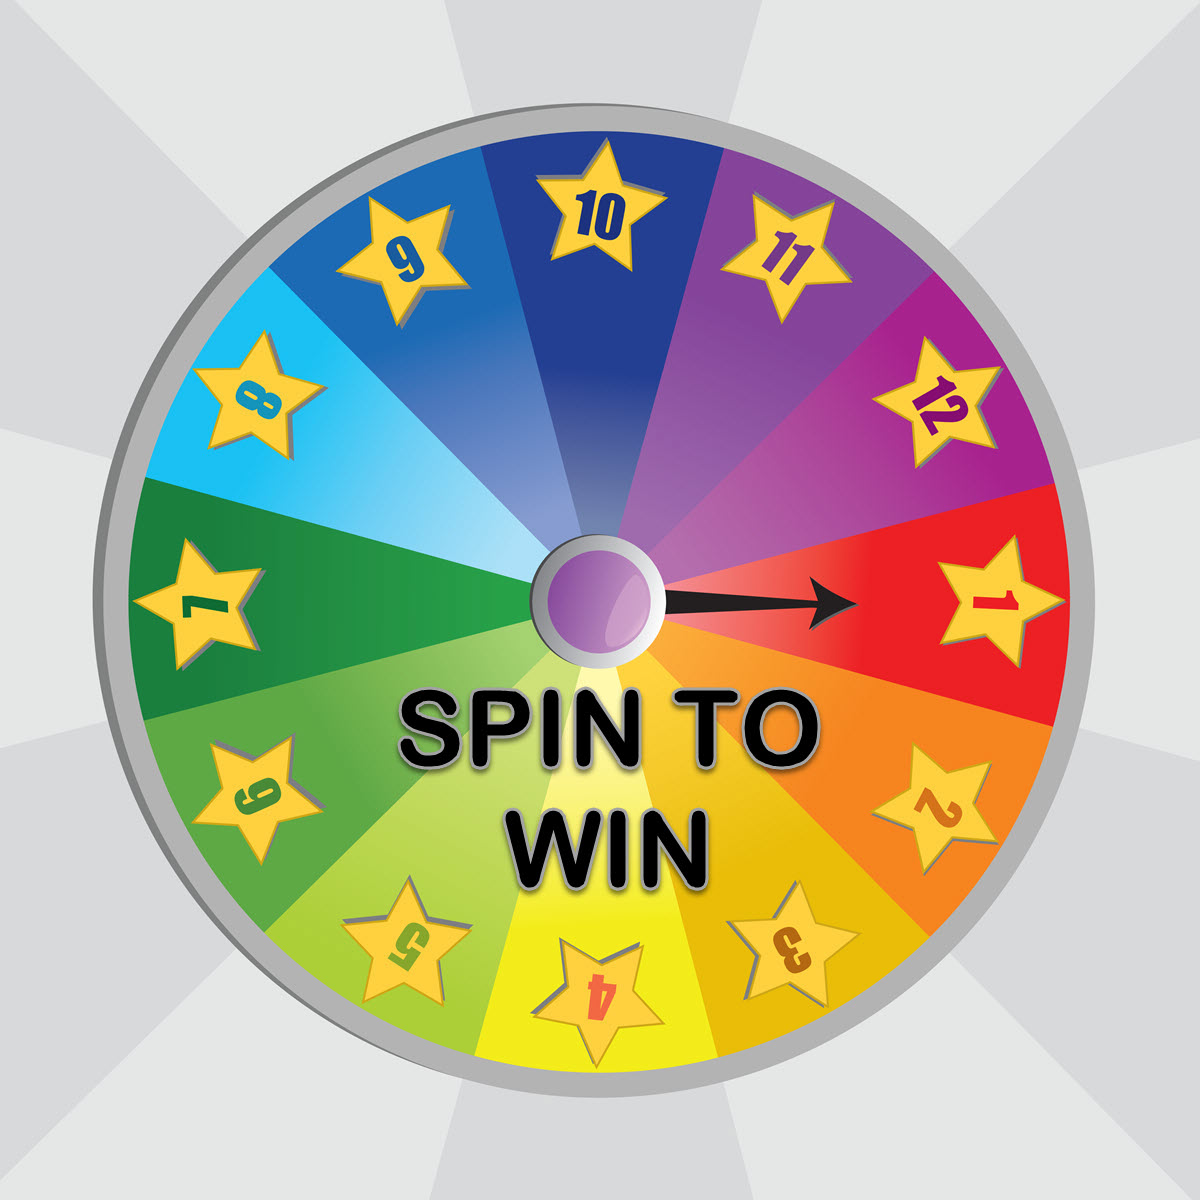 Spin To Win wheel captioned